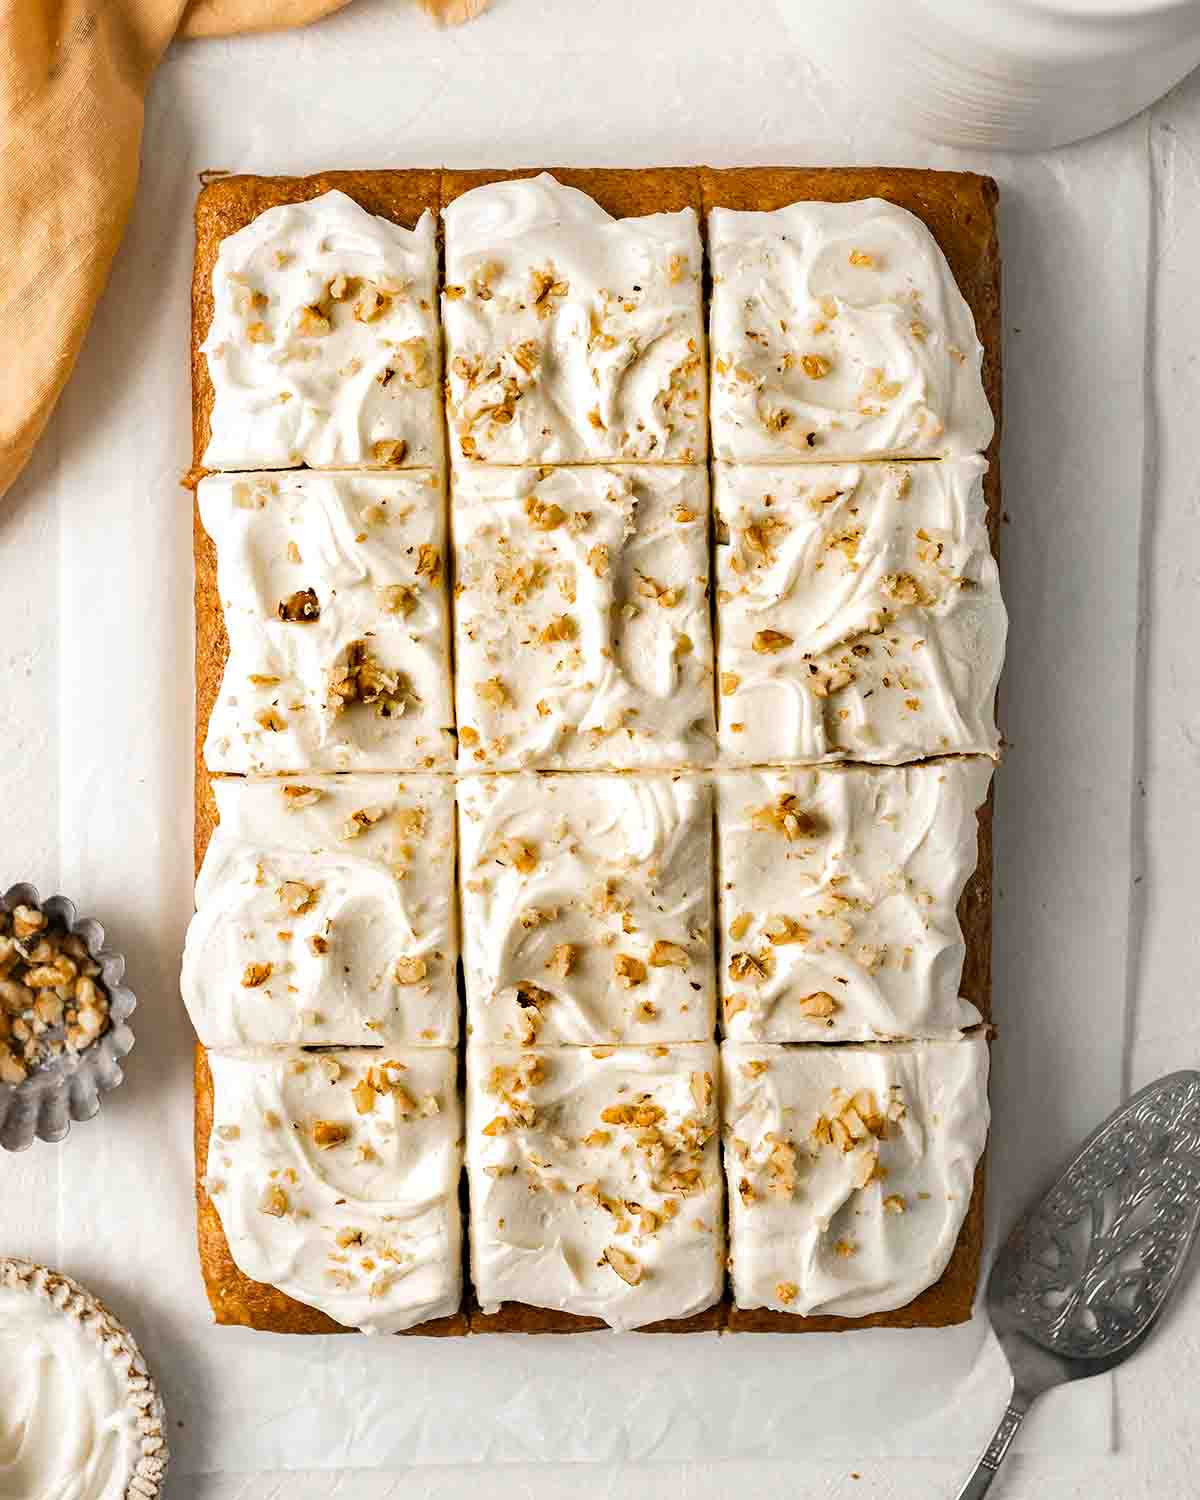 Overhead image of banana cake with cream cheese frosting and chopped walnuts, cut into serves.